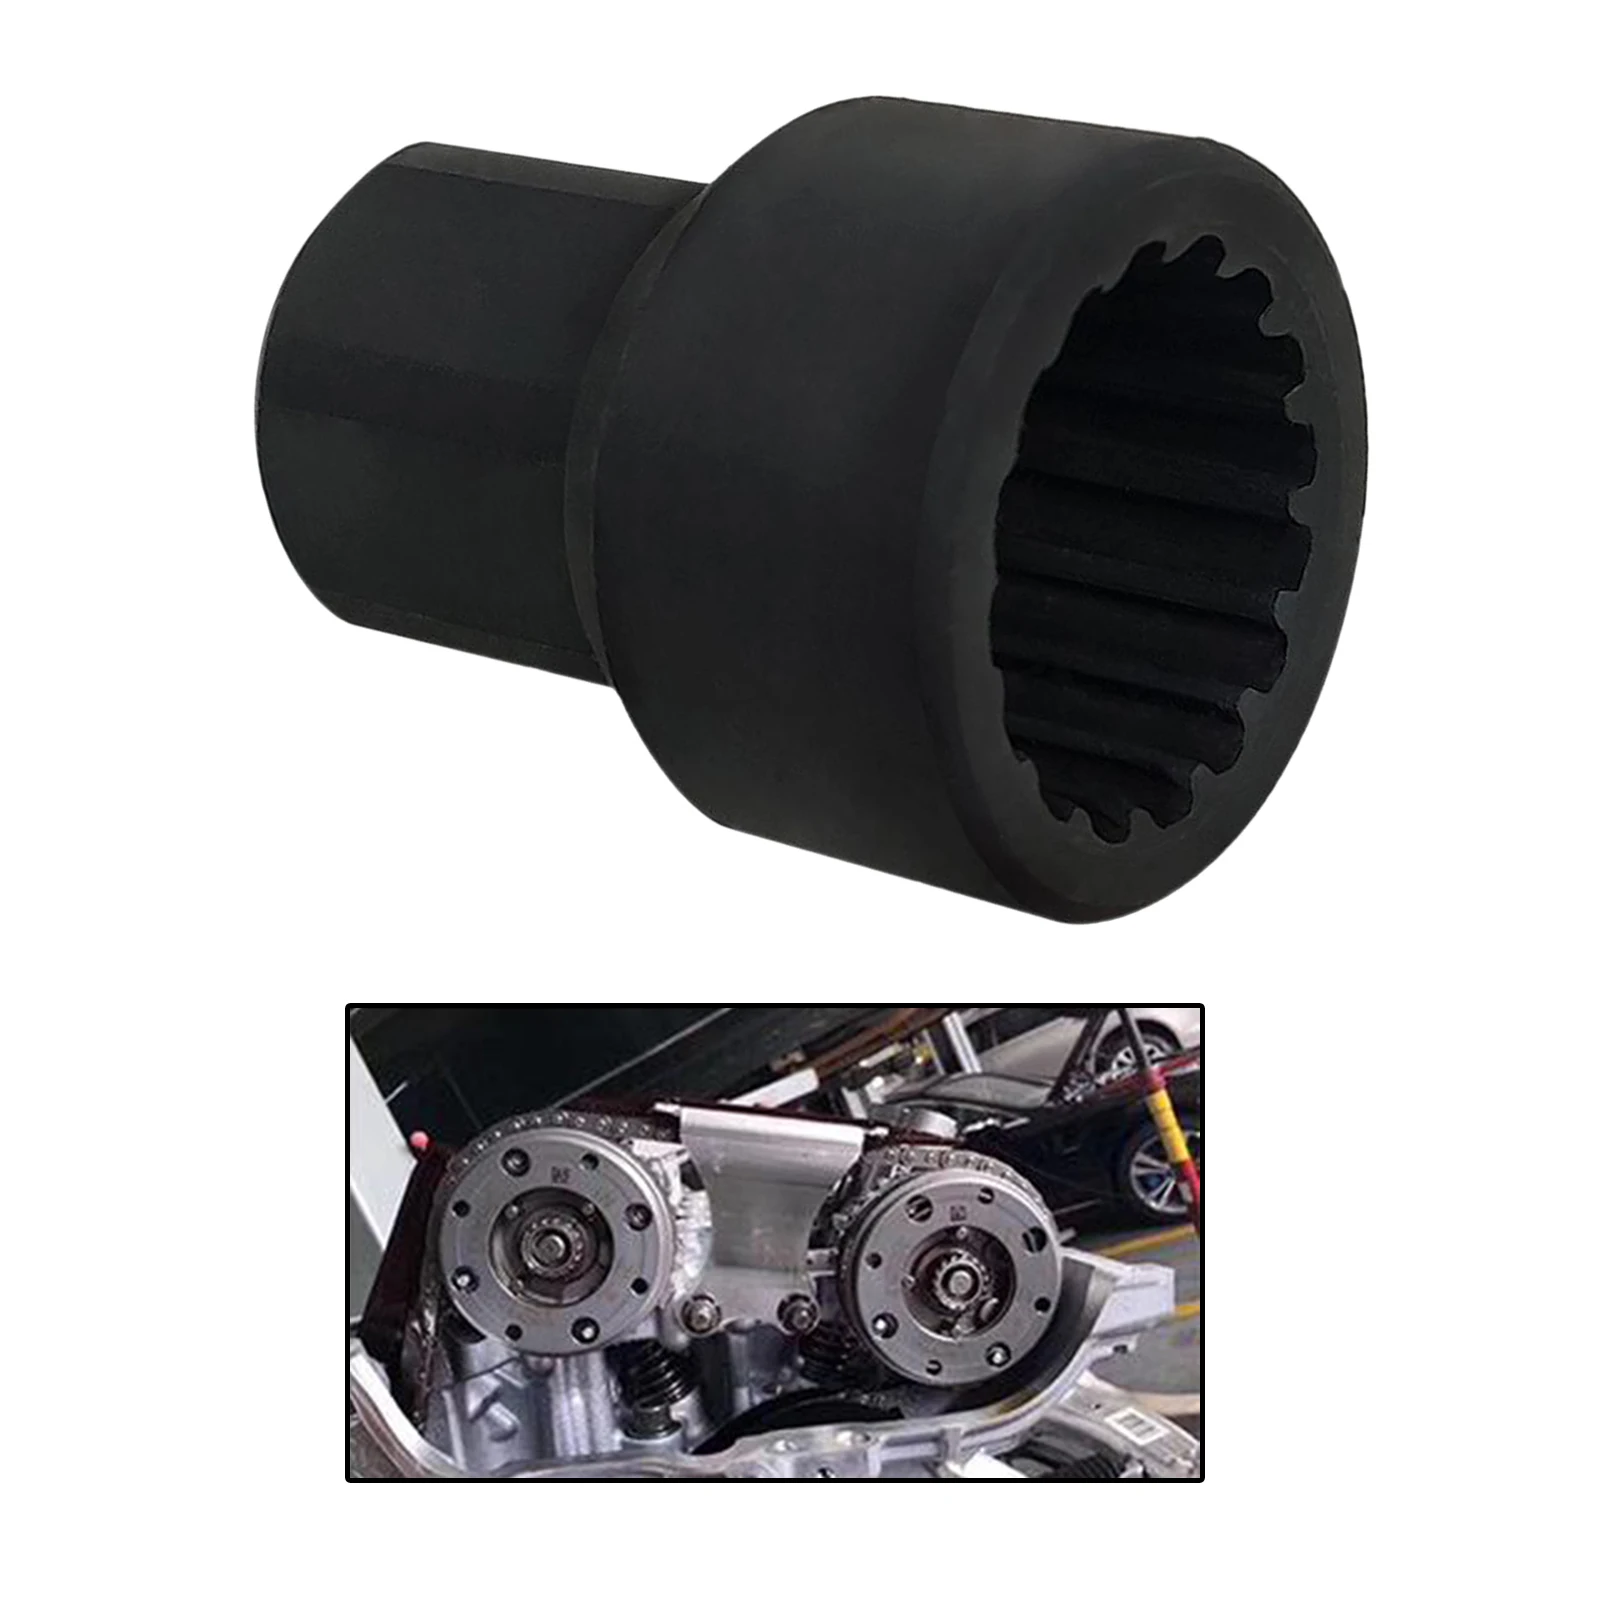 HIGHER Durable and Strong Camshaft   1/2 x 22mm 16PT Replacement for  Engine Disassembly Sleeve